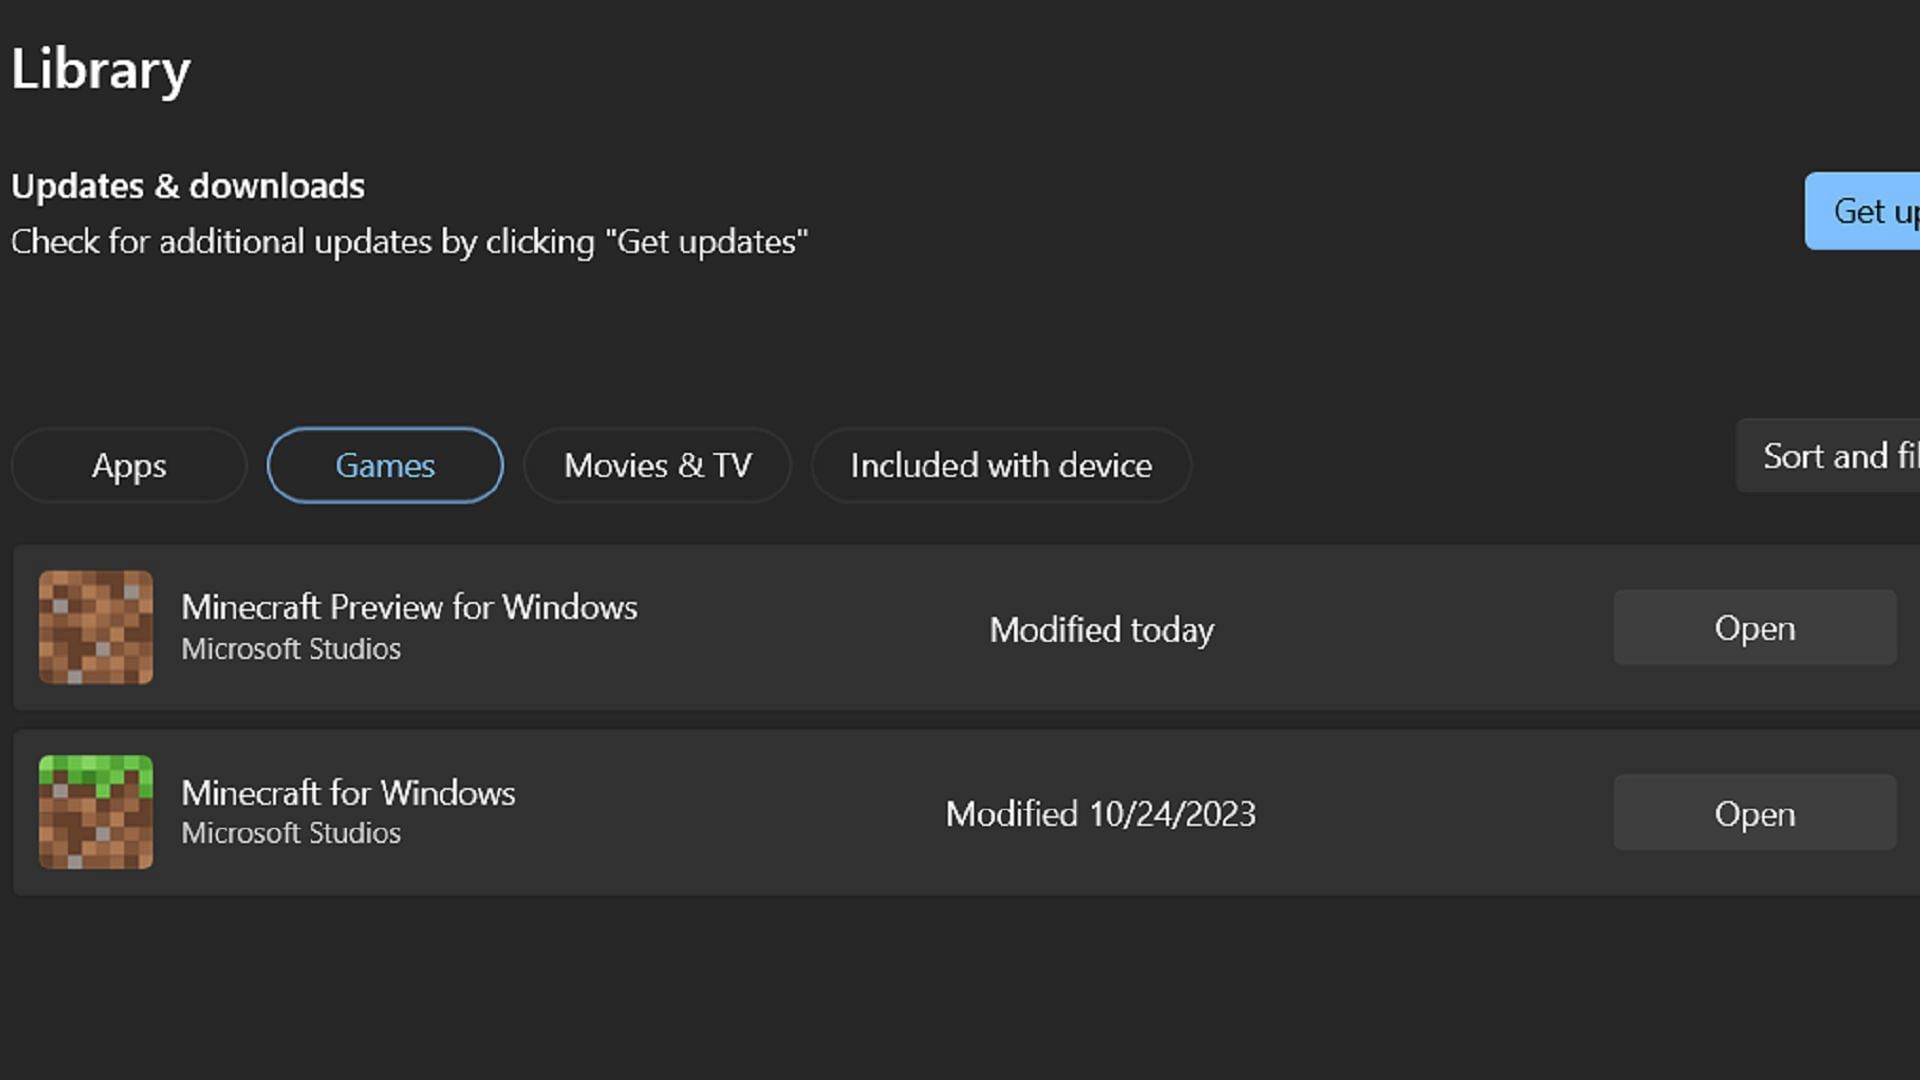 The Microsoft Store can provide easy updates for Bedrock Previews that have already been installed (Image via Microsoft)